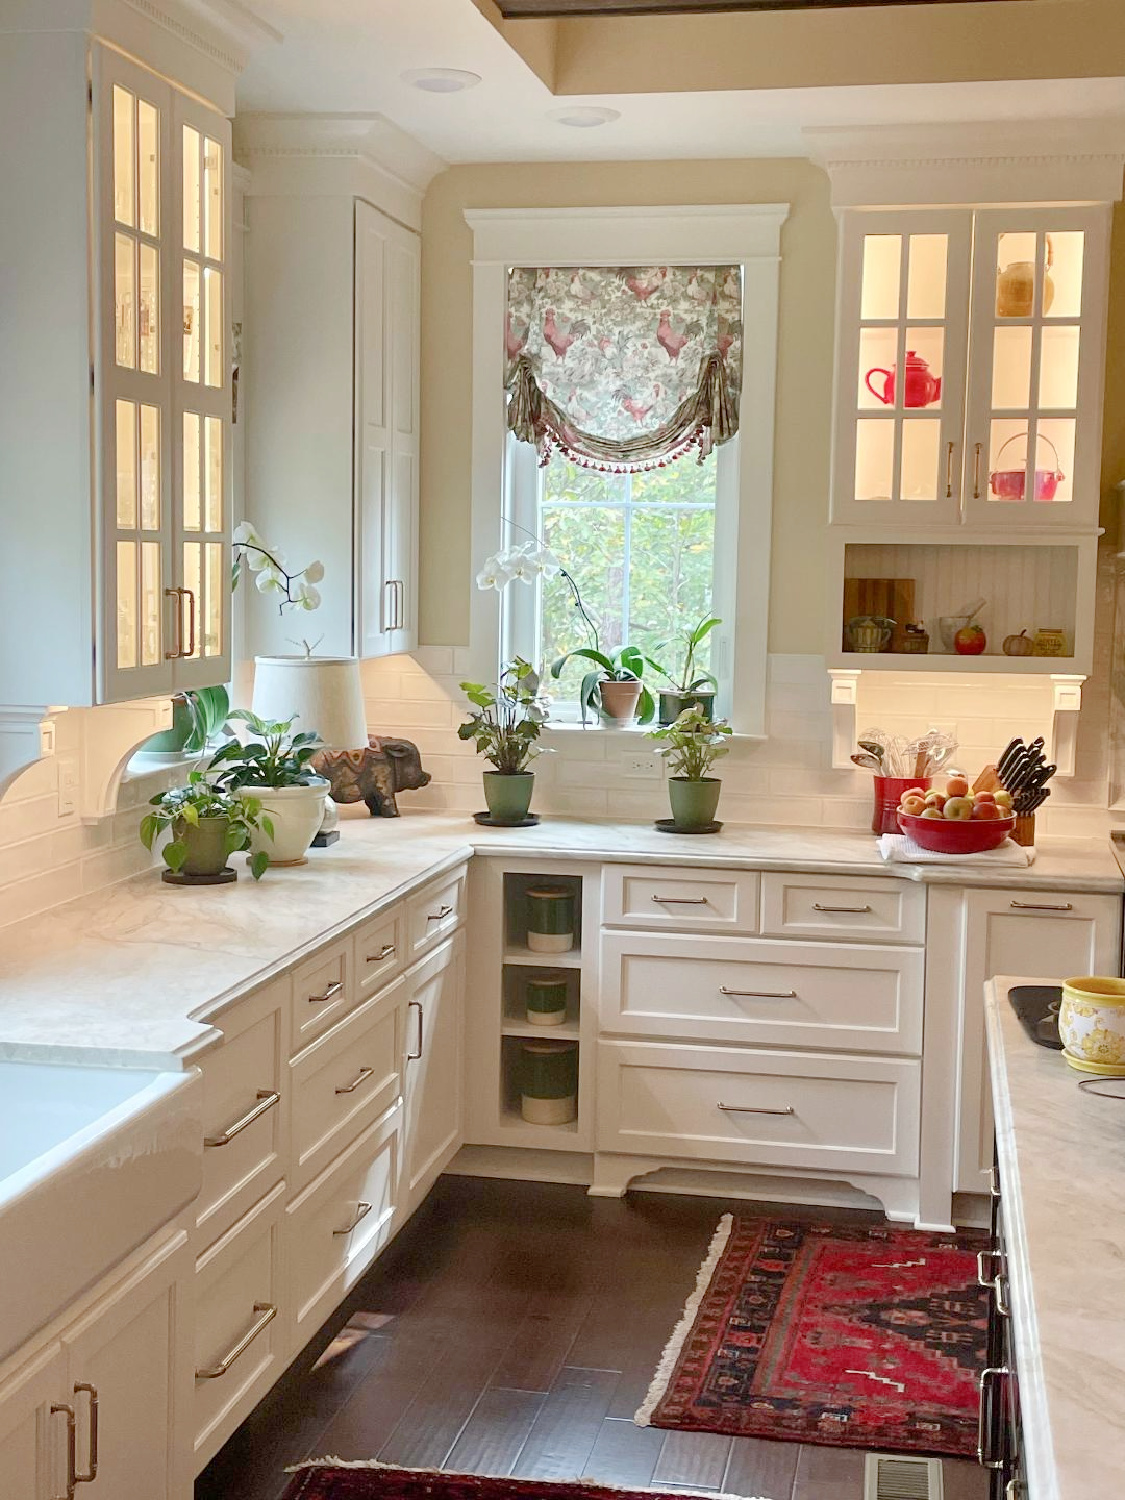 French country kitchen with custom chicken toile London shades, white cabinets, and quartzite counters - Hello Lovely Studio. #frenchcountrykitchen